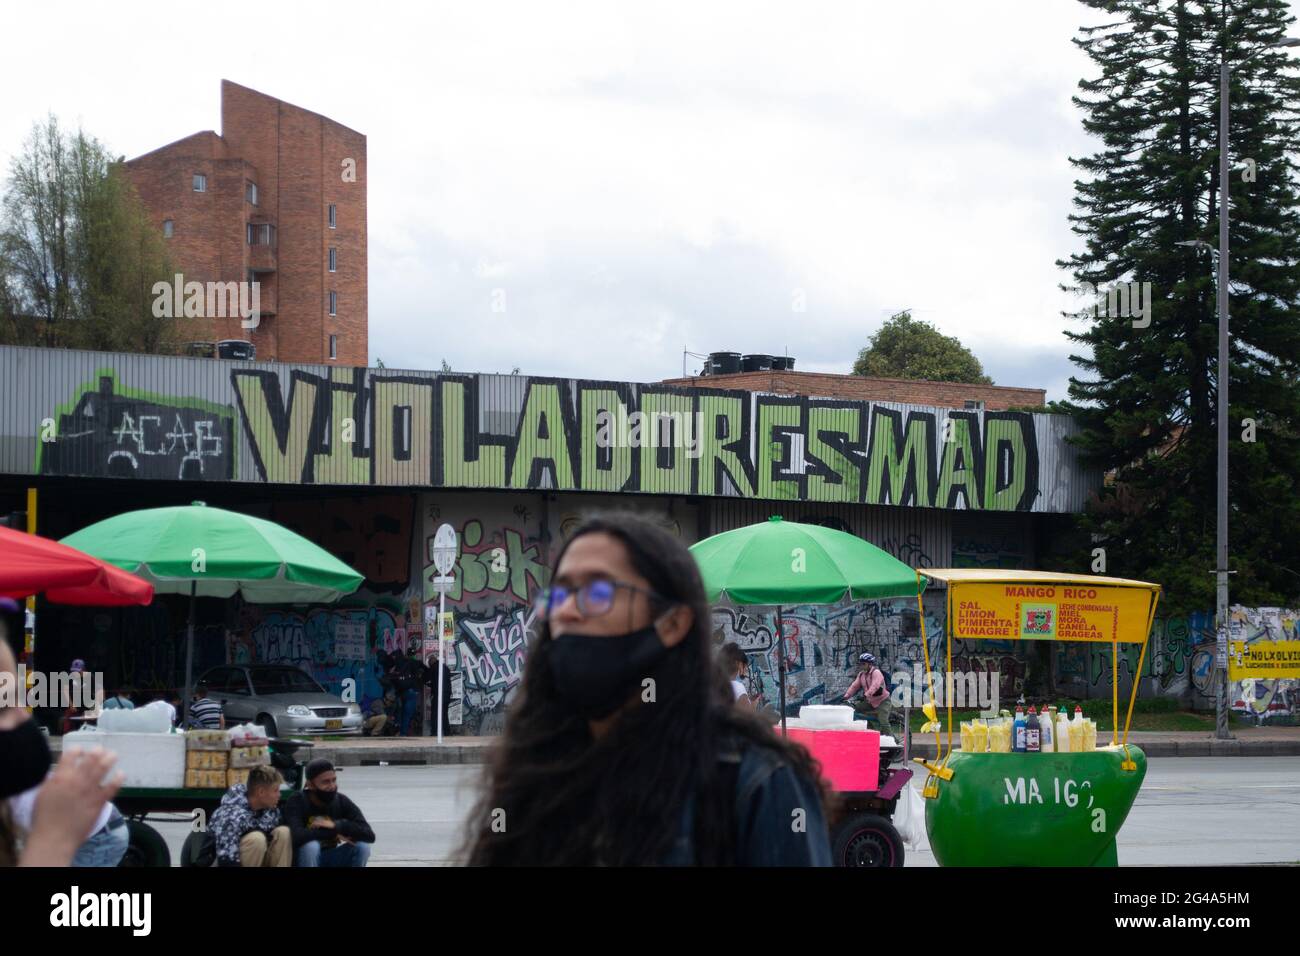 A protester in front of a graffiti criticizing police violence amid anti-government demonstrations in Bogota, Colombia on June 19, 2021 Stock Photo